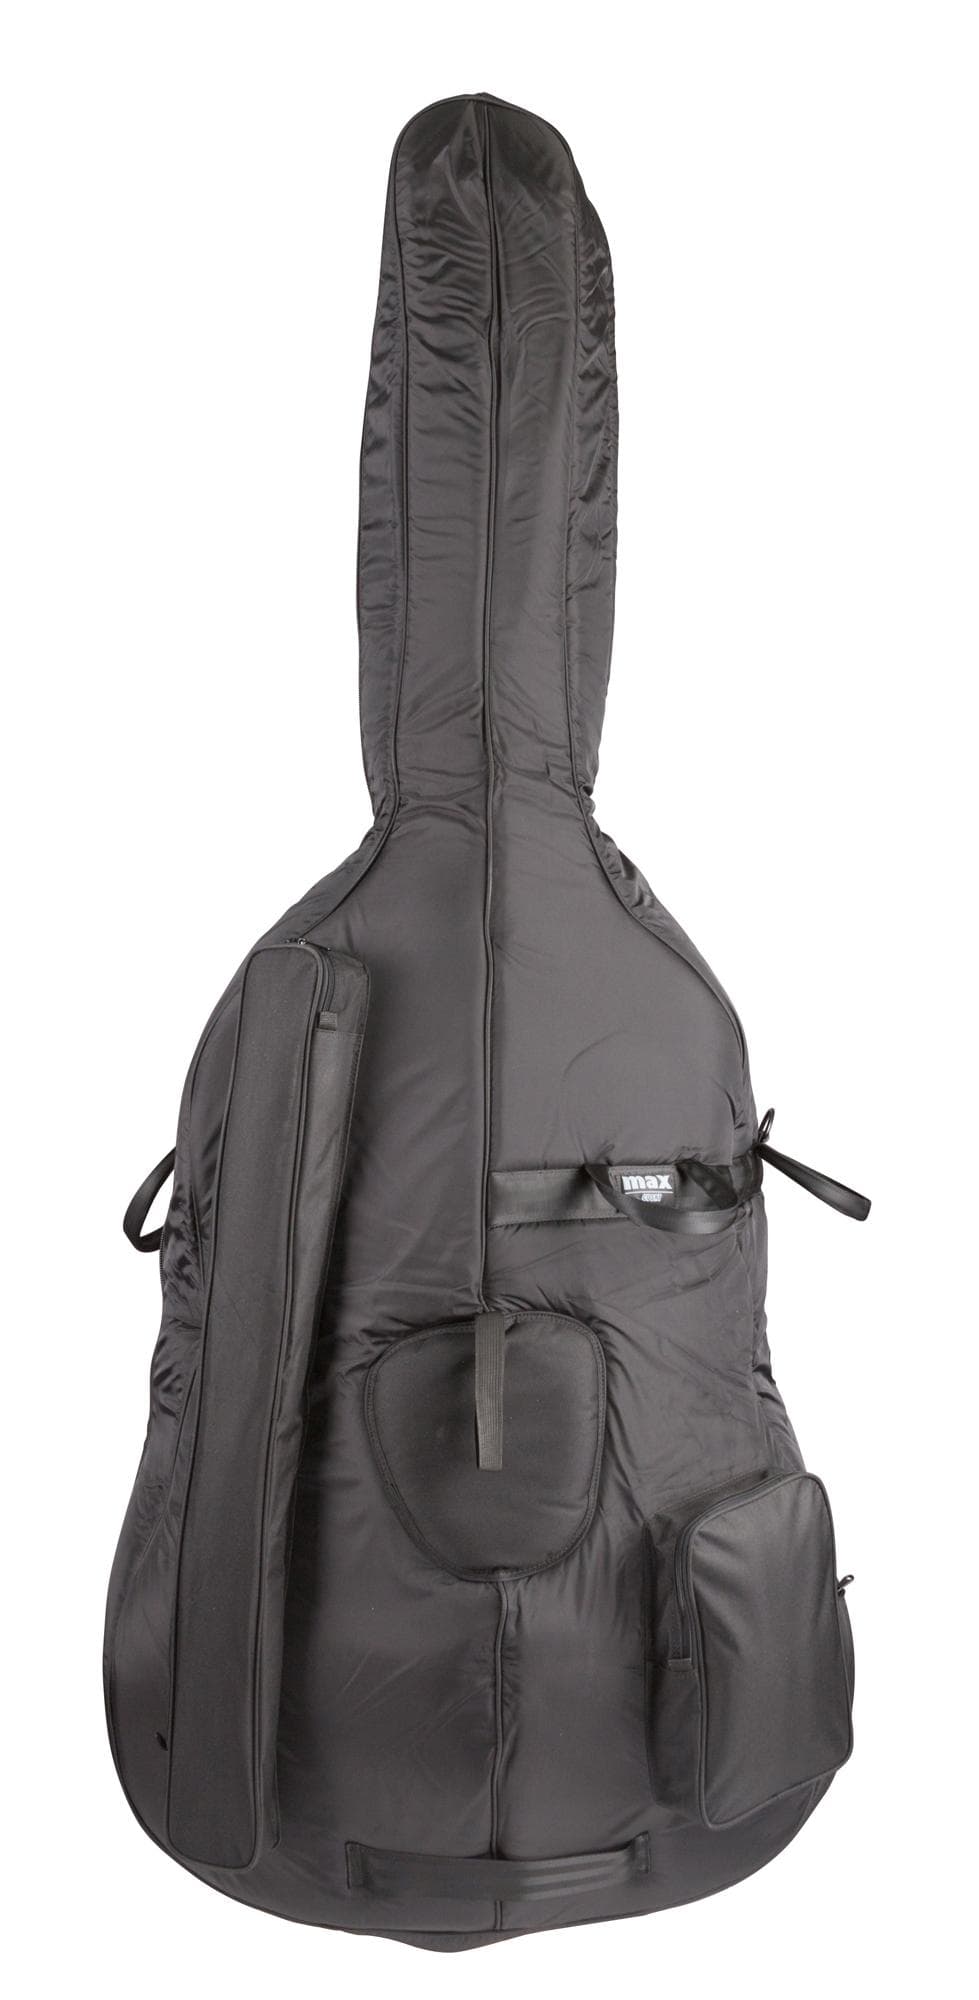 Professional 3/4 Size Bass Bag - Cushioned & Durable